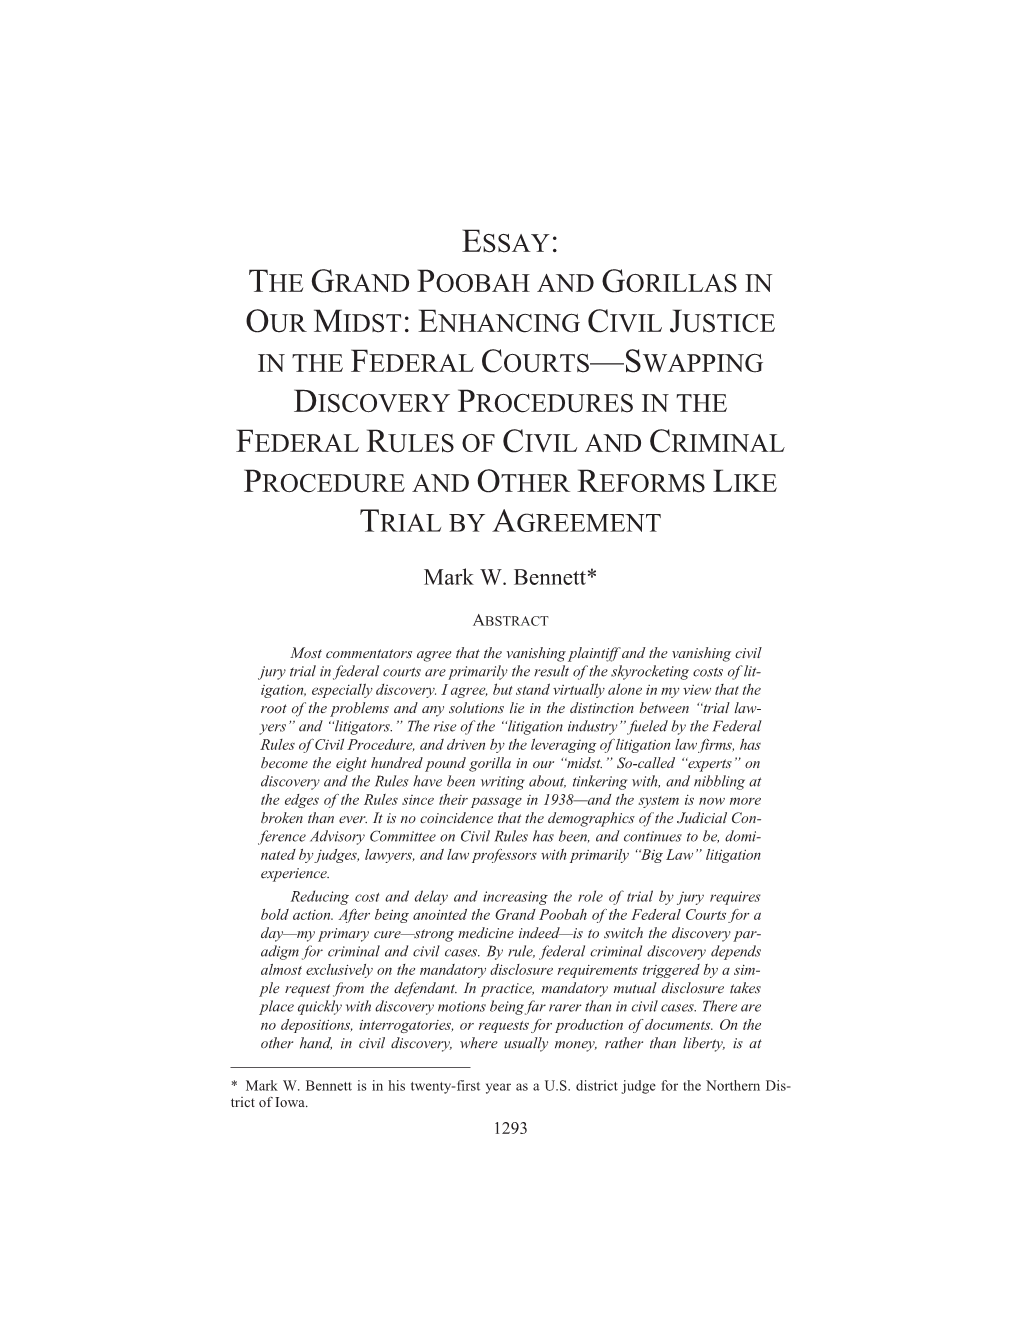 Essay: the Grand Poobah and Gorillas in Our Midst: Enhancing Civil Justice